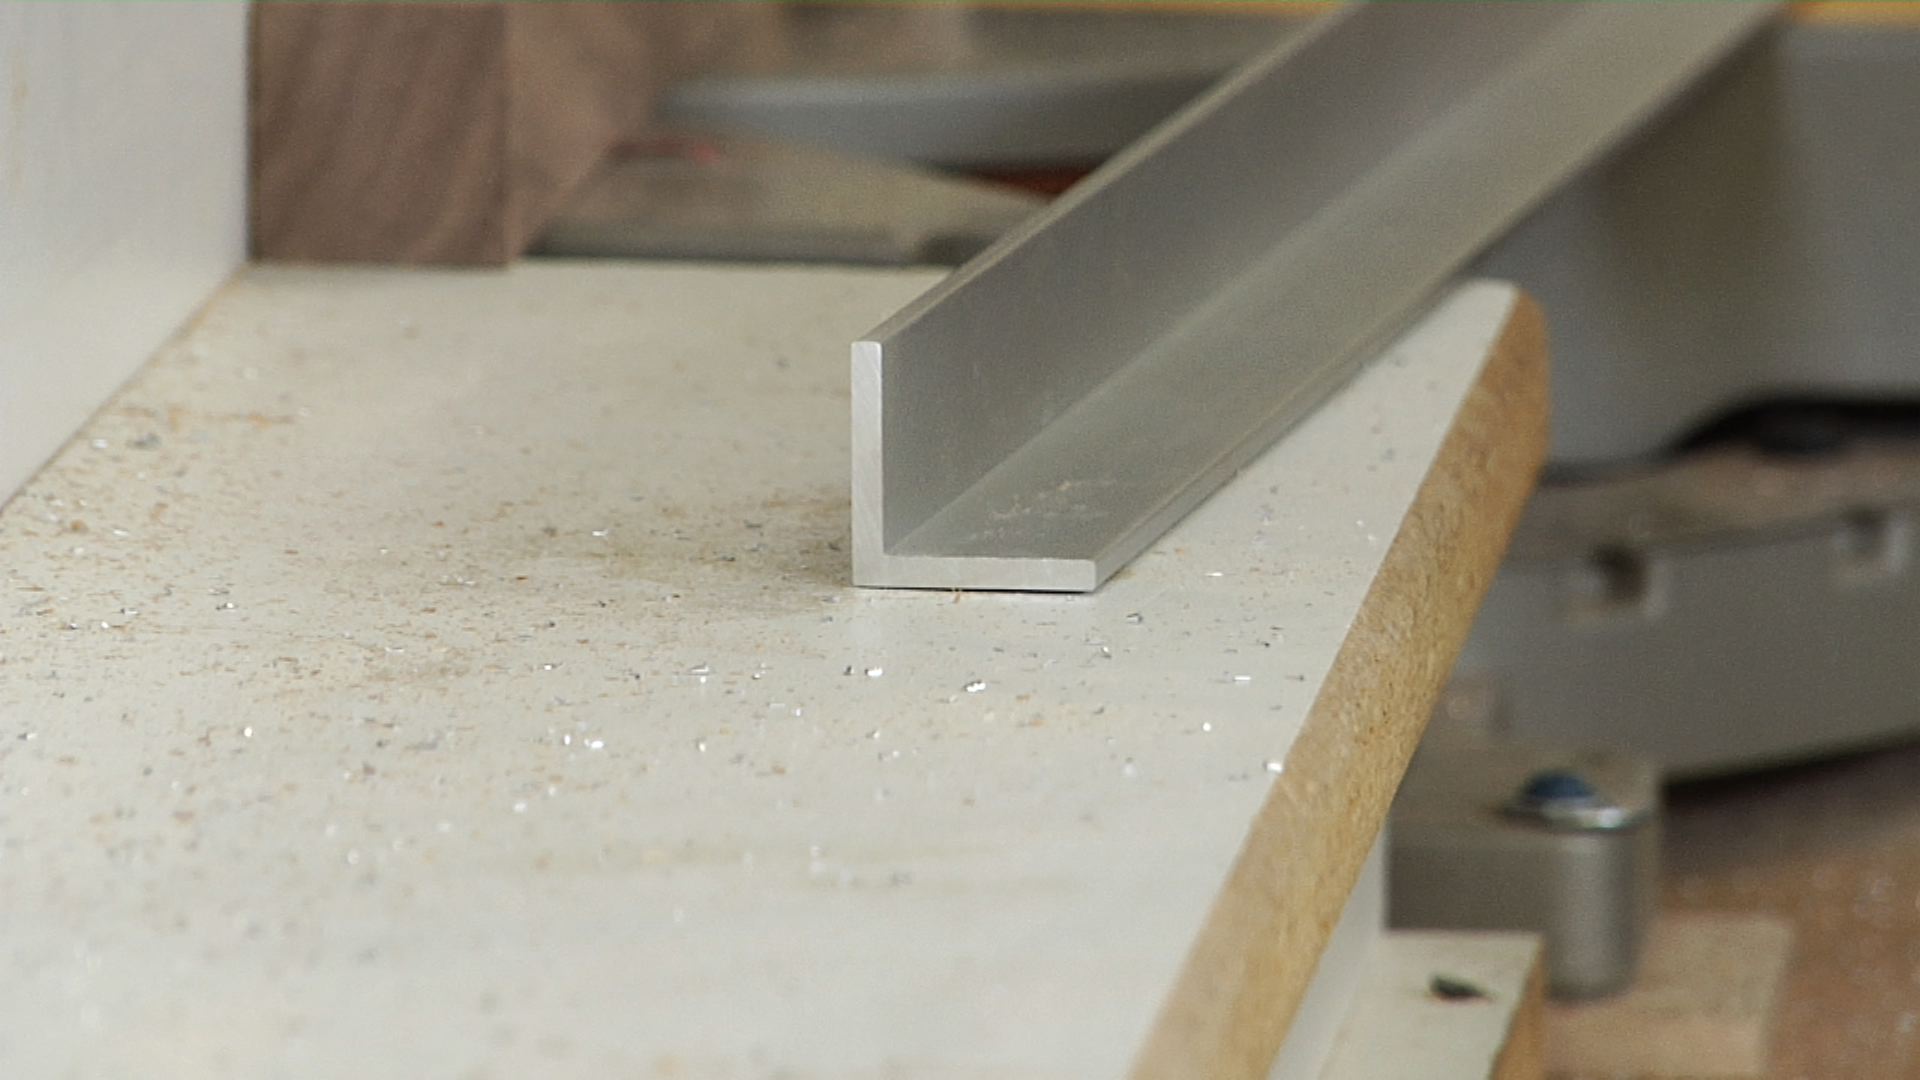 Cutting Non-Ferrous Metals on a Miter Saw